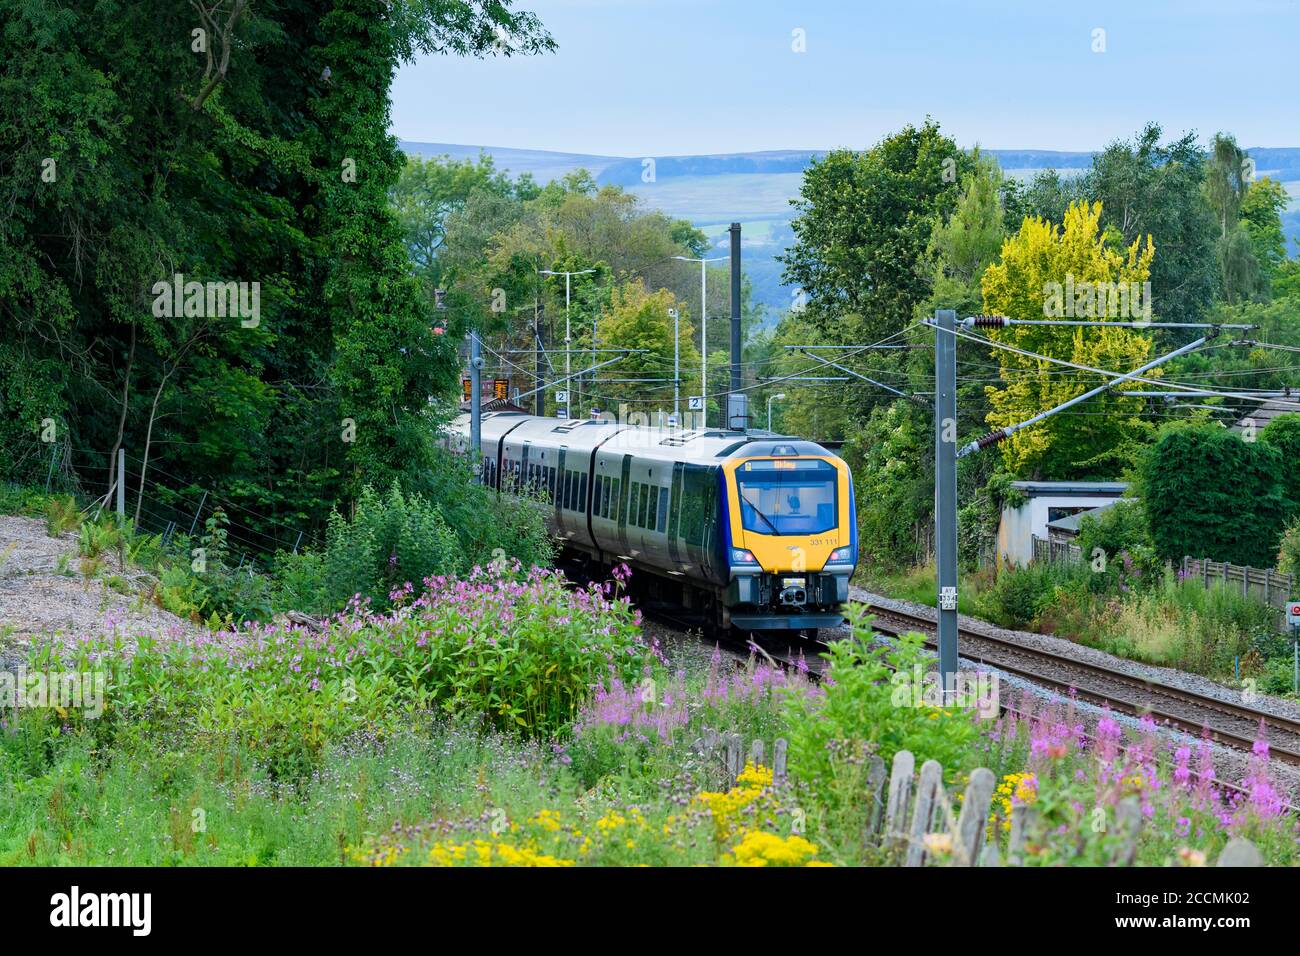 Northern rail local passenger service train 331 travelling on Wharfedale Line railway tracks to rural village station - Burley, Yorkshire, England, UK Stock Photo